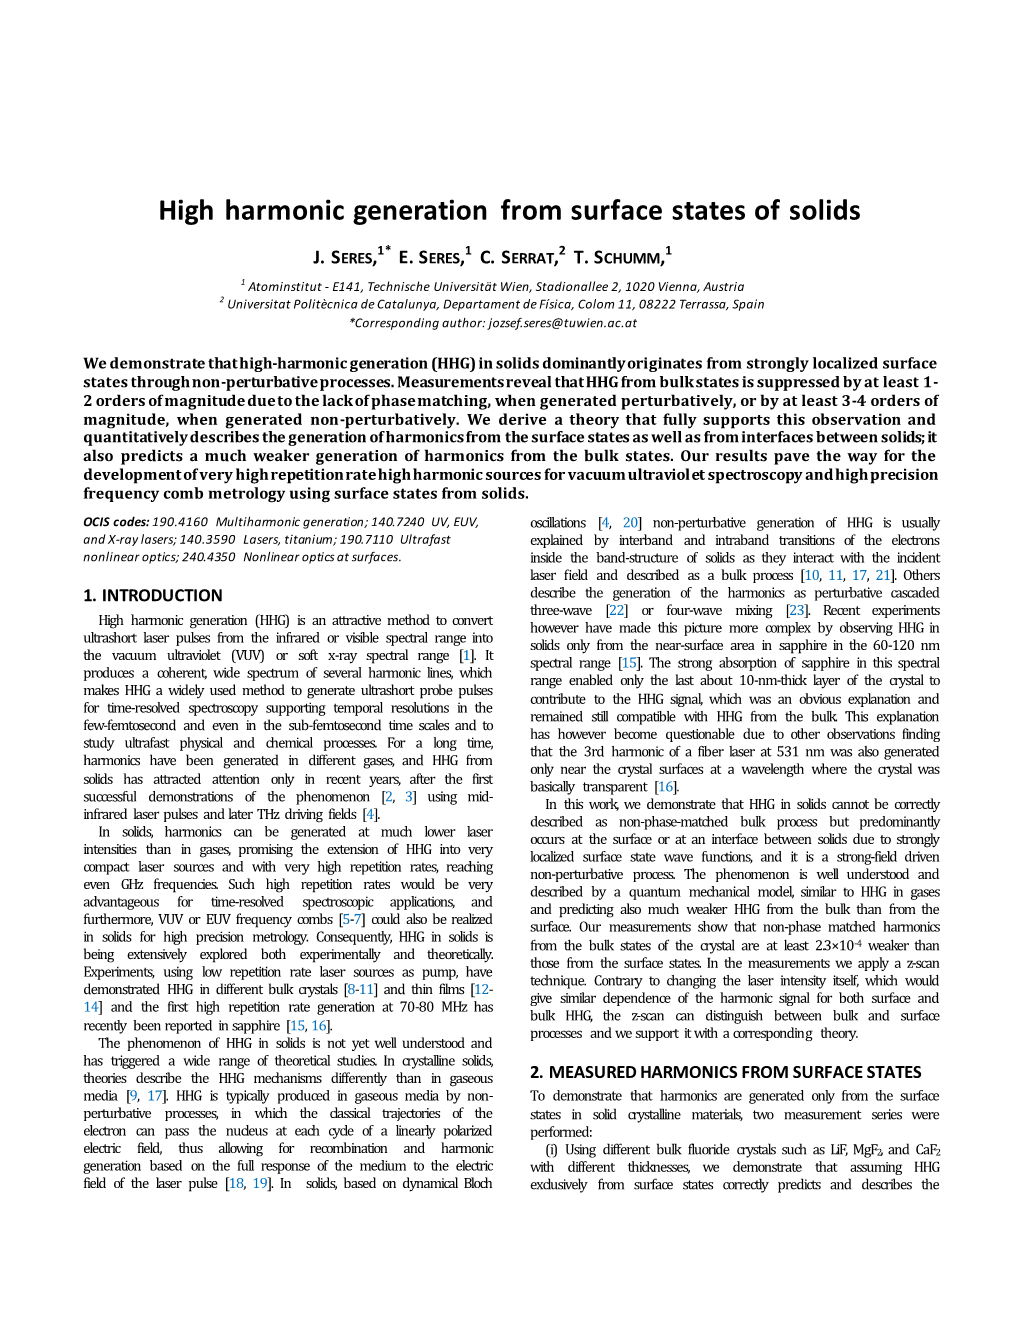 High Harmonic Generation from Surface States of Solids